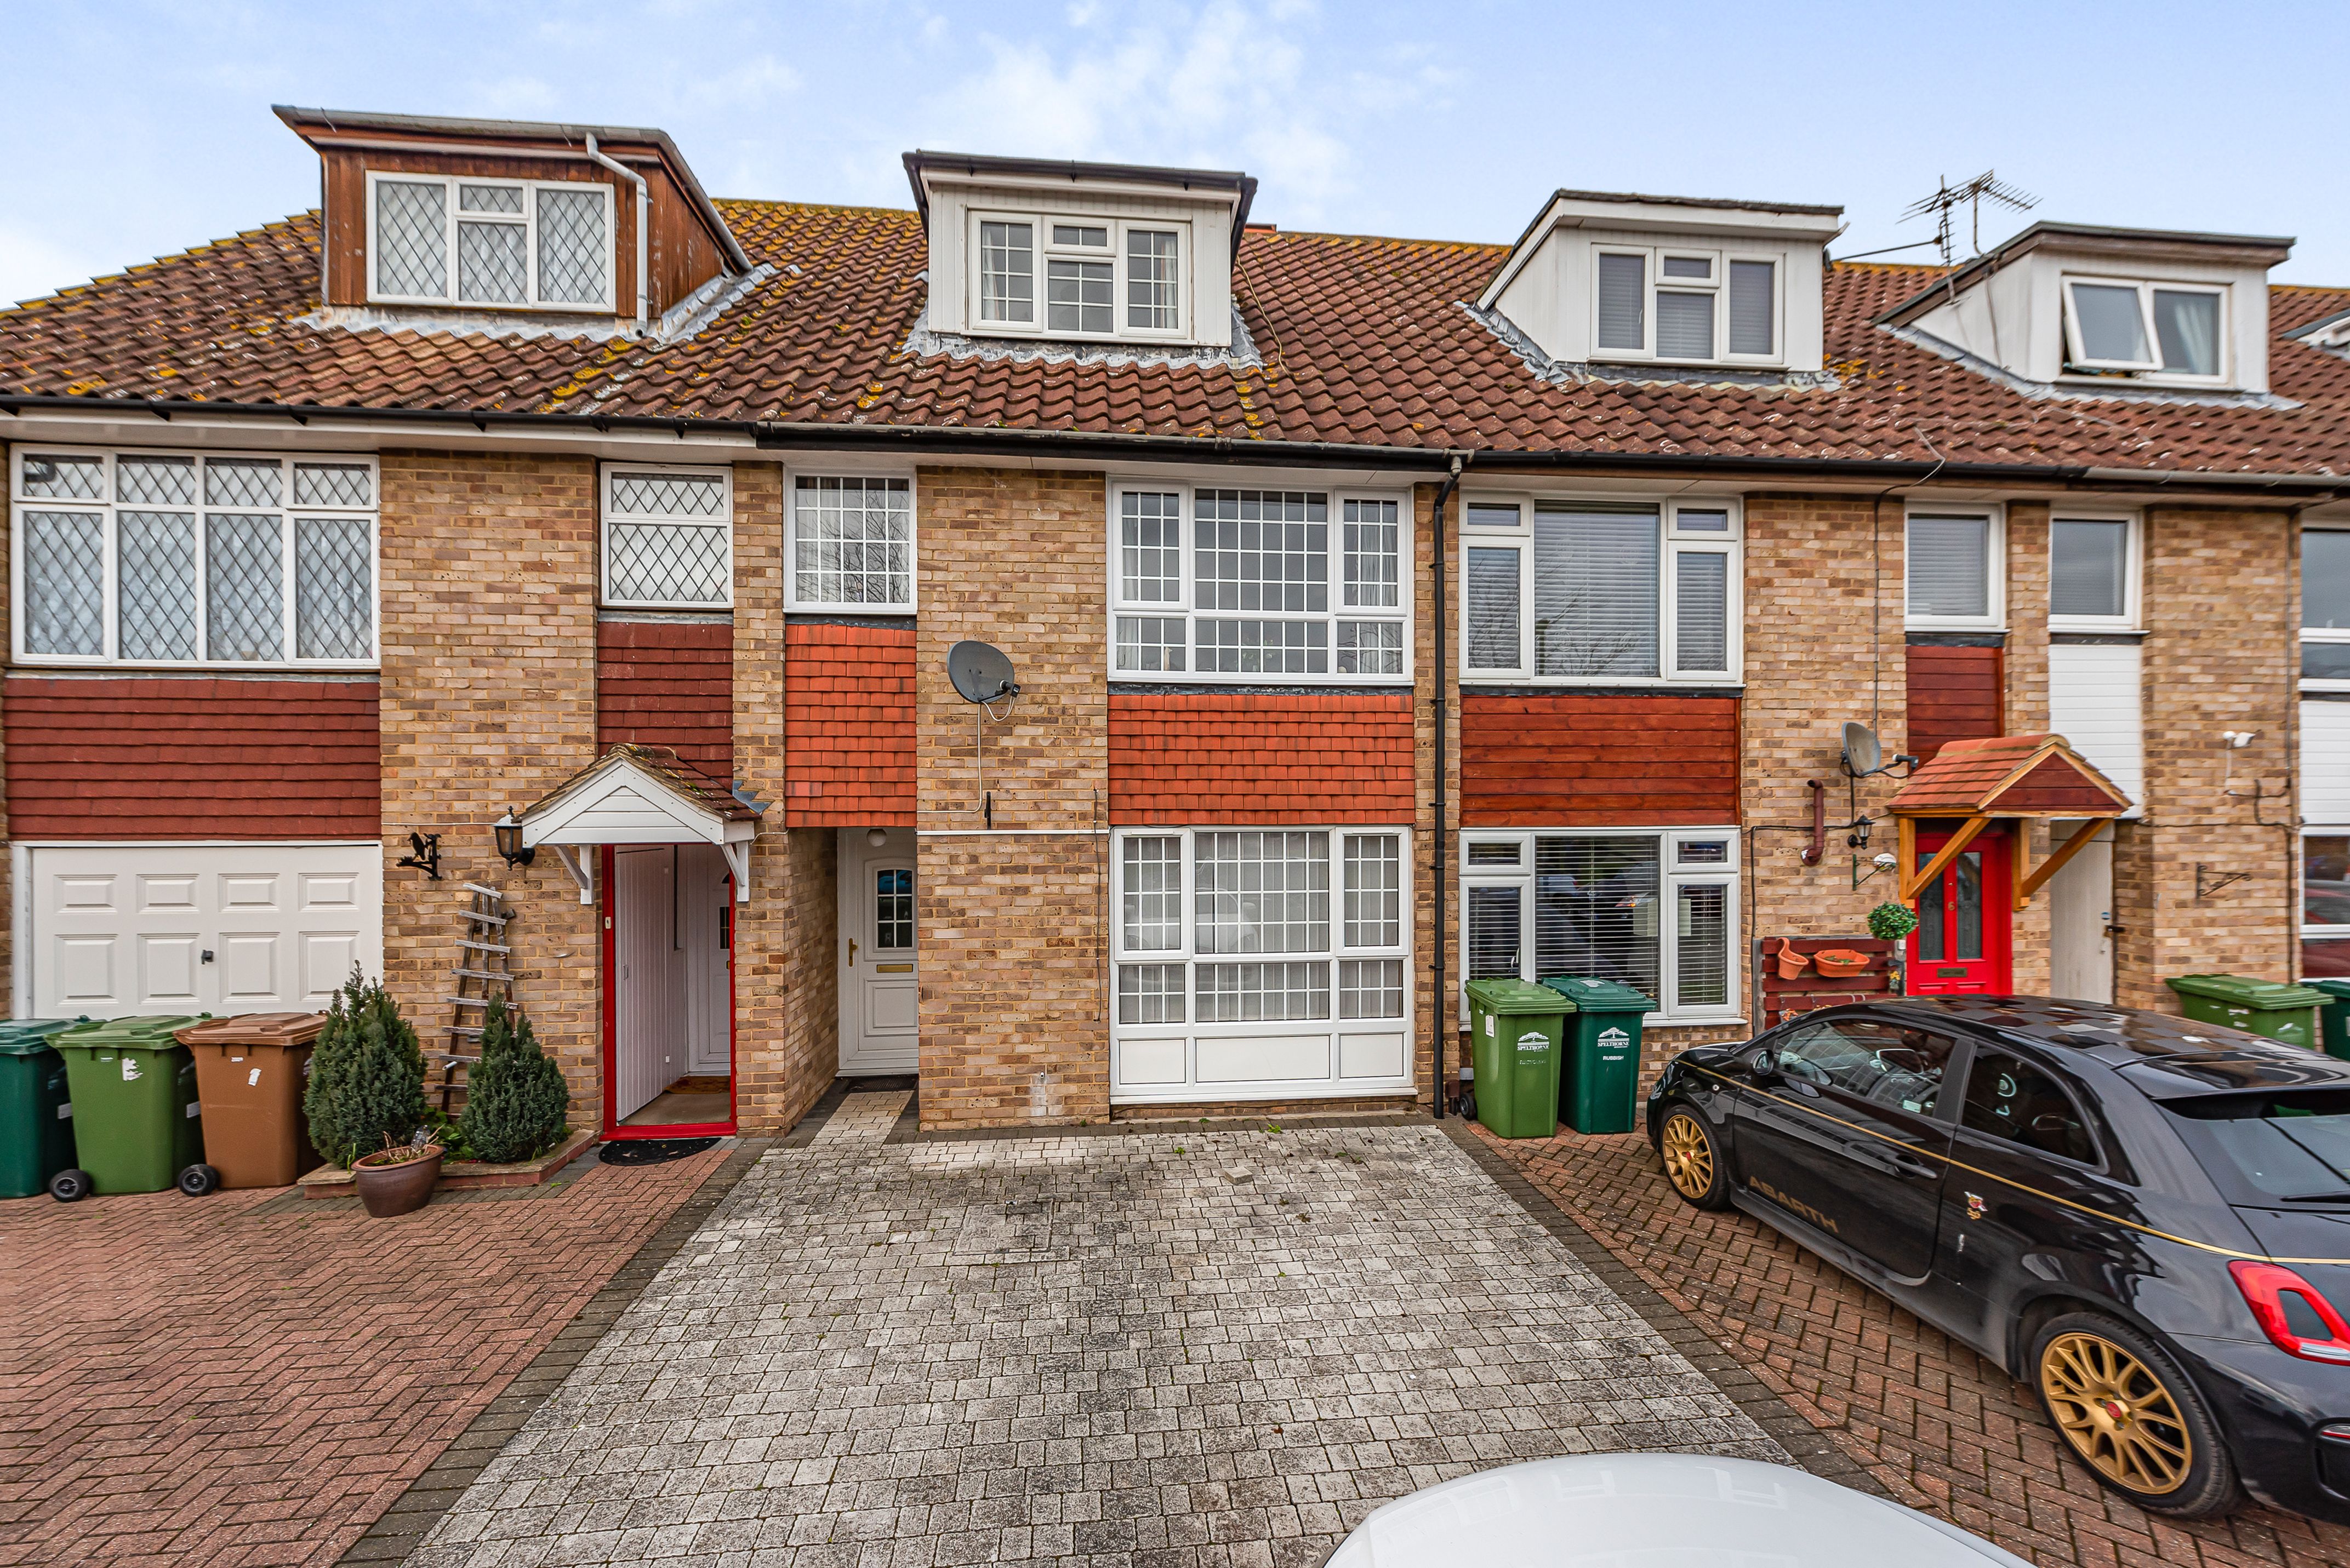 4 bed terraced house for sale in Bingham Drive, Staines-Upon-Thames - Property Image 1